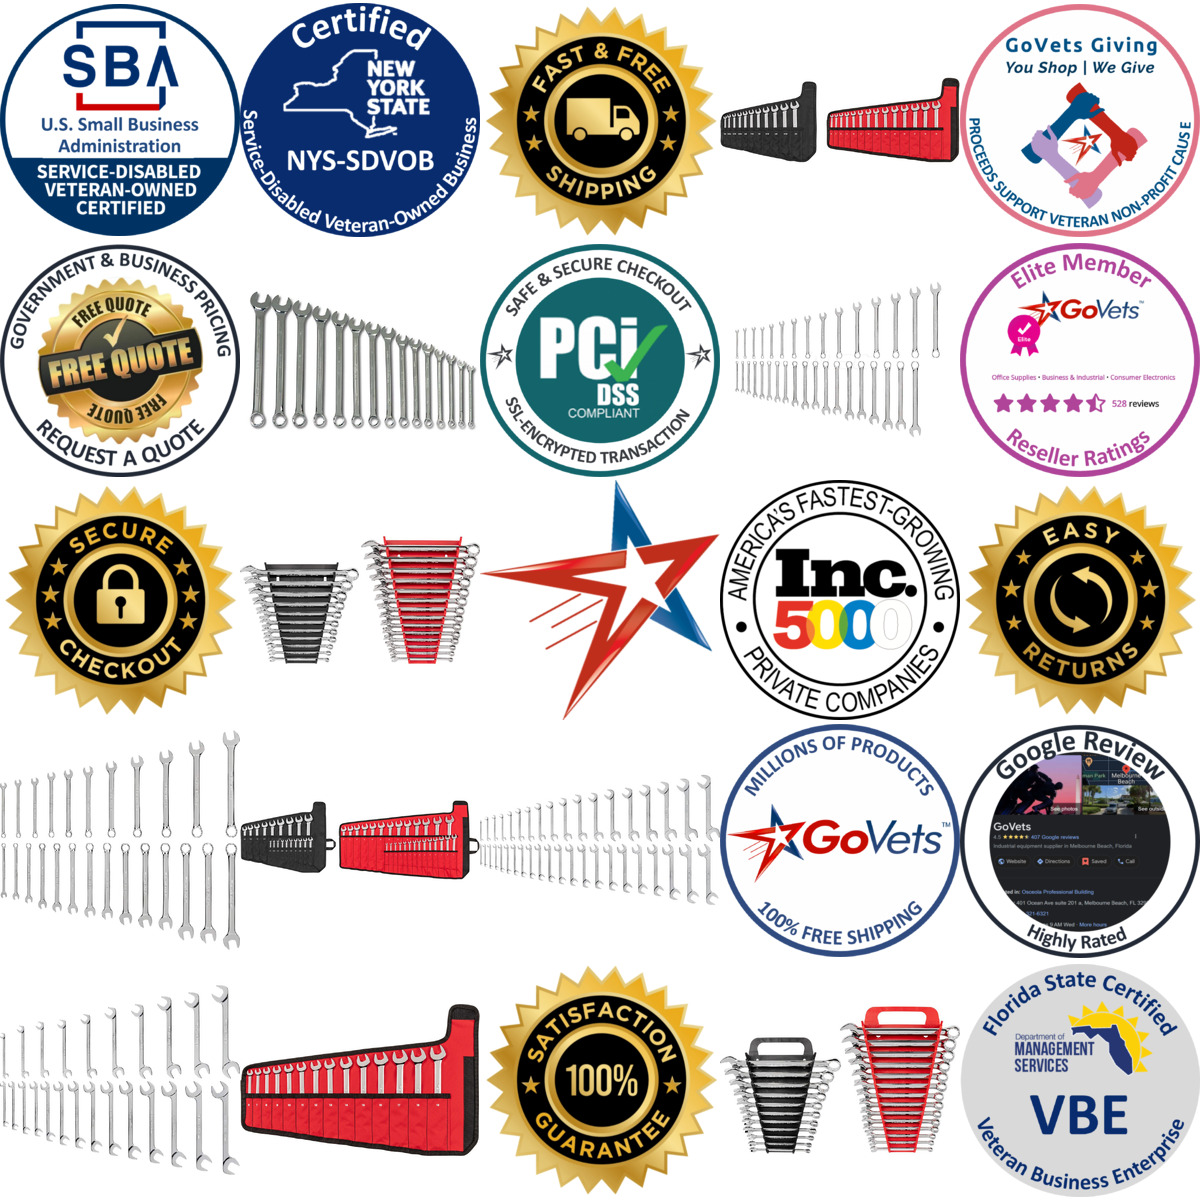 A selection of Specialty Sockets products on GoVets